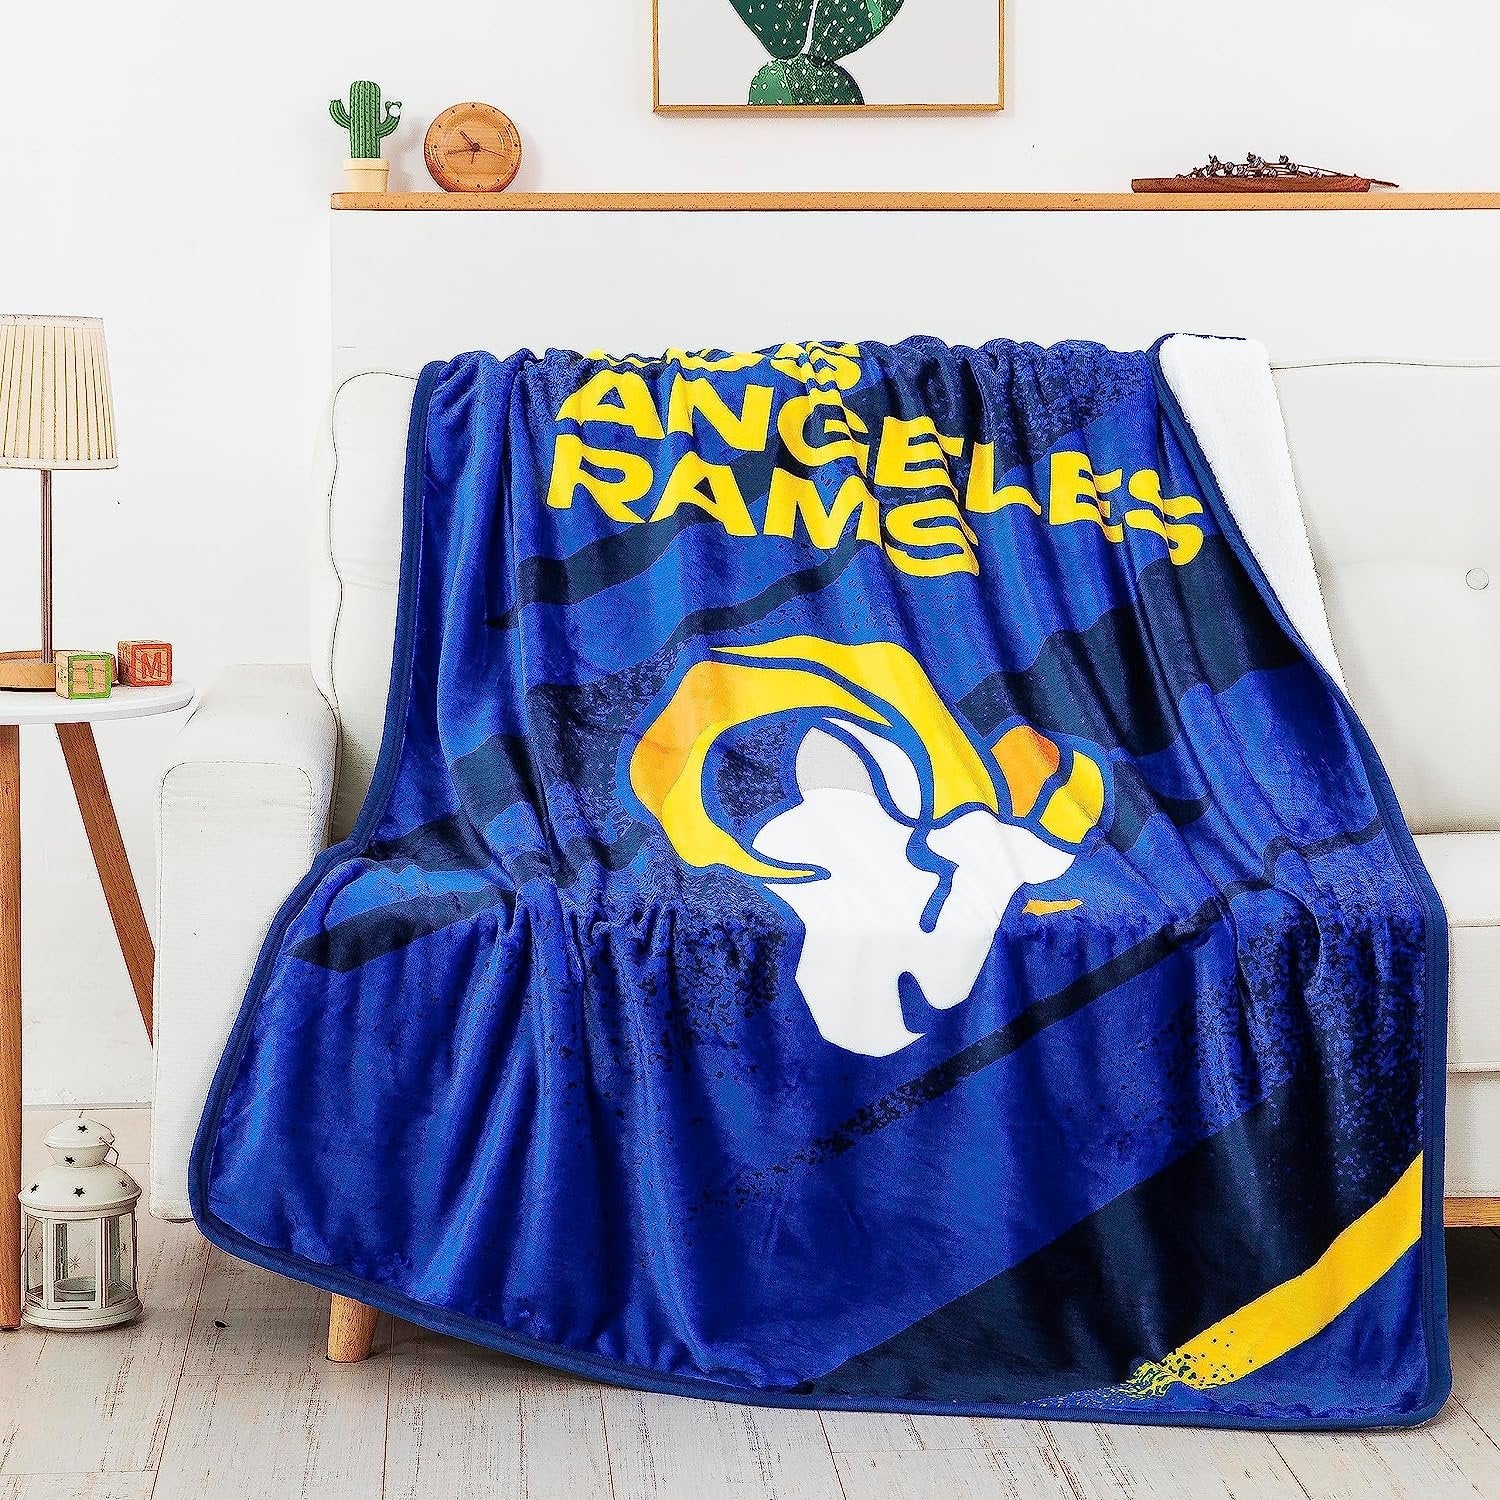 Los Angeles Rams Throw Blanket, Sherpa Raschel Polyester, Silk Touch Style, Velocity Design, 50x60 Inch